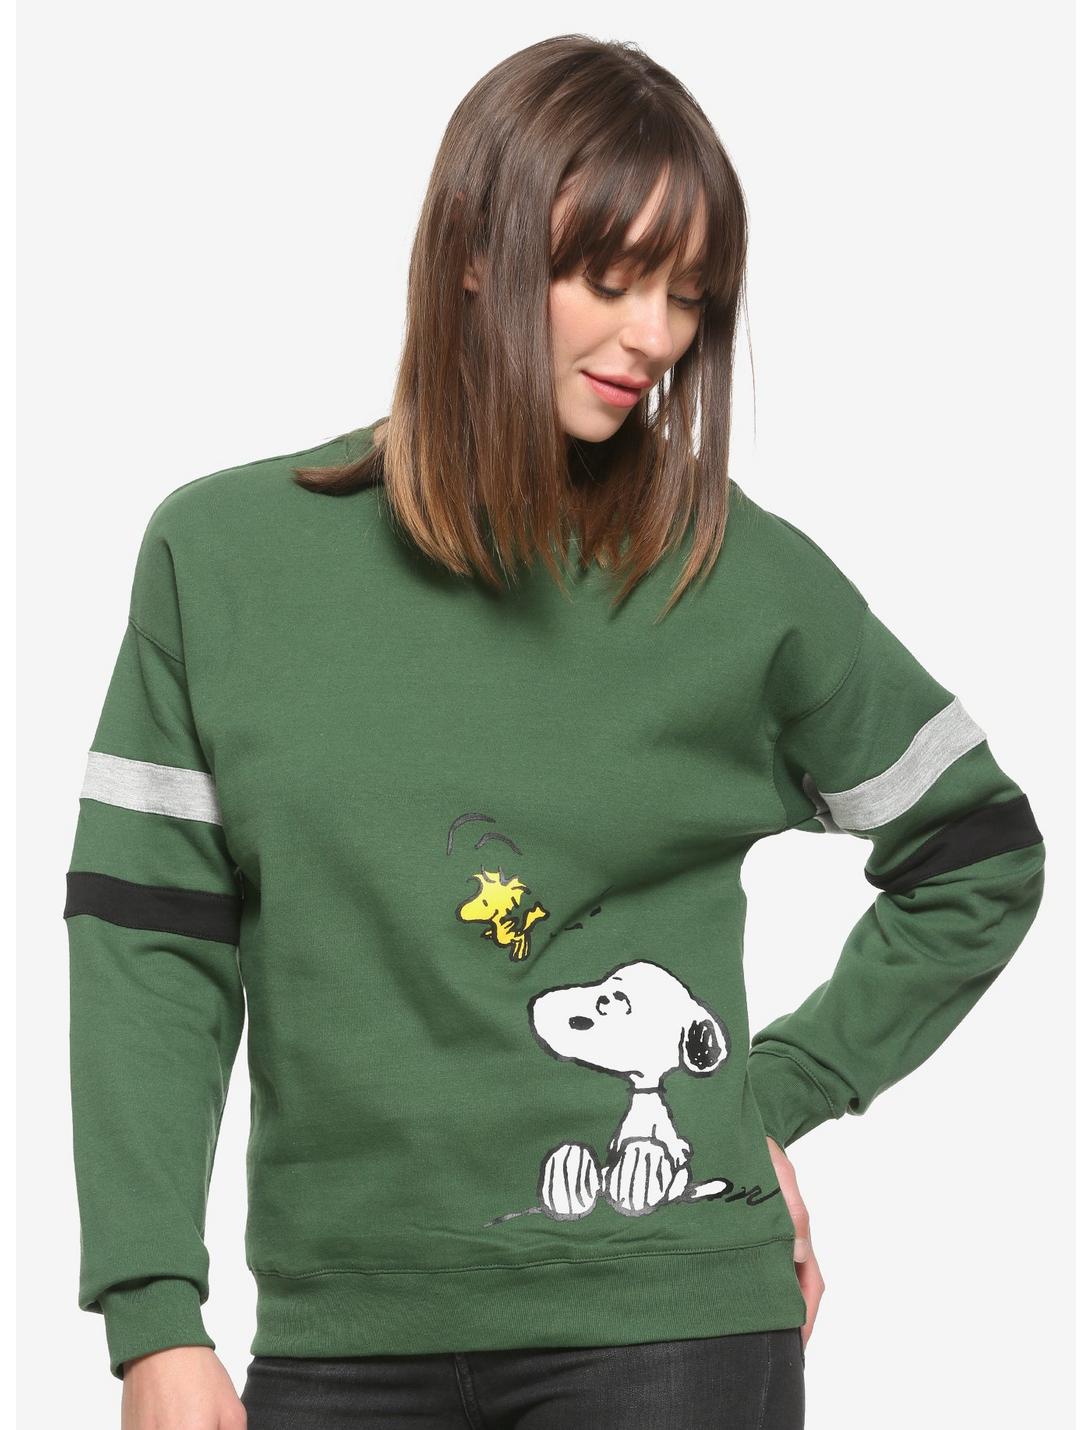 Peanuts Snoopy and Woodstock Stripe Sleeved Women's Crewneck - BoxLunch Exclusive, GREY, hi-res